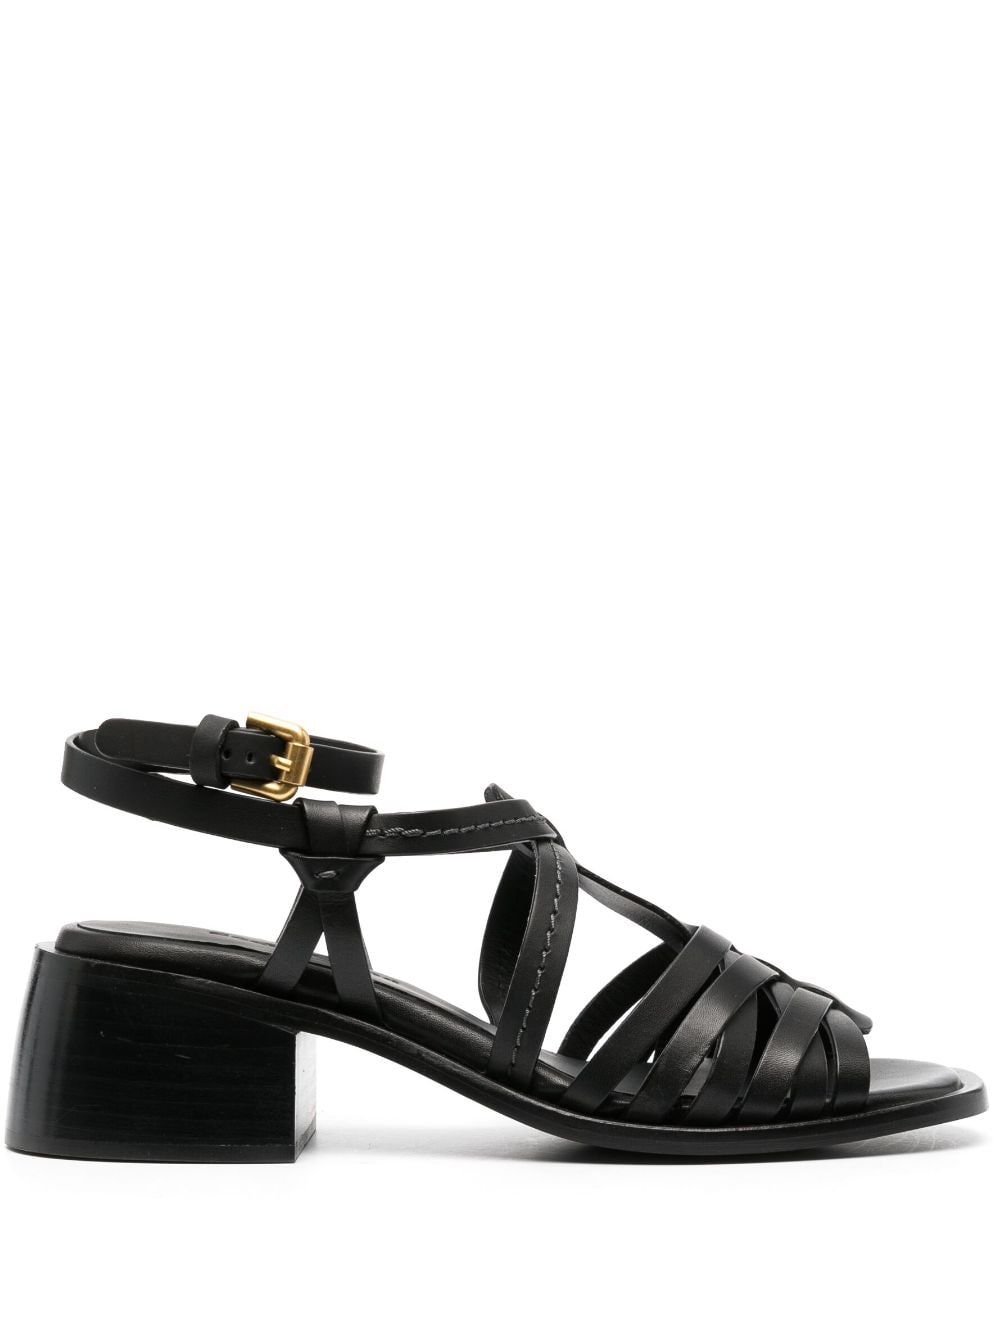 See by Chloé strappy 60mm leather sandals - Black von See by Chloé